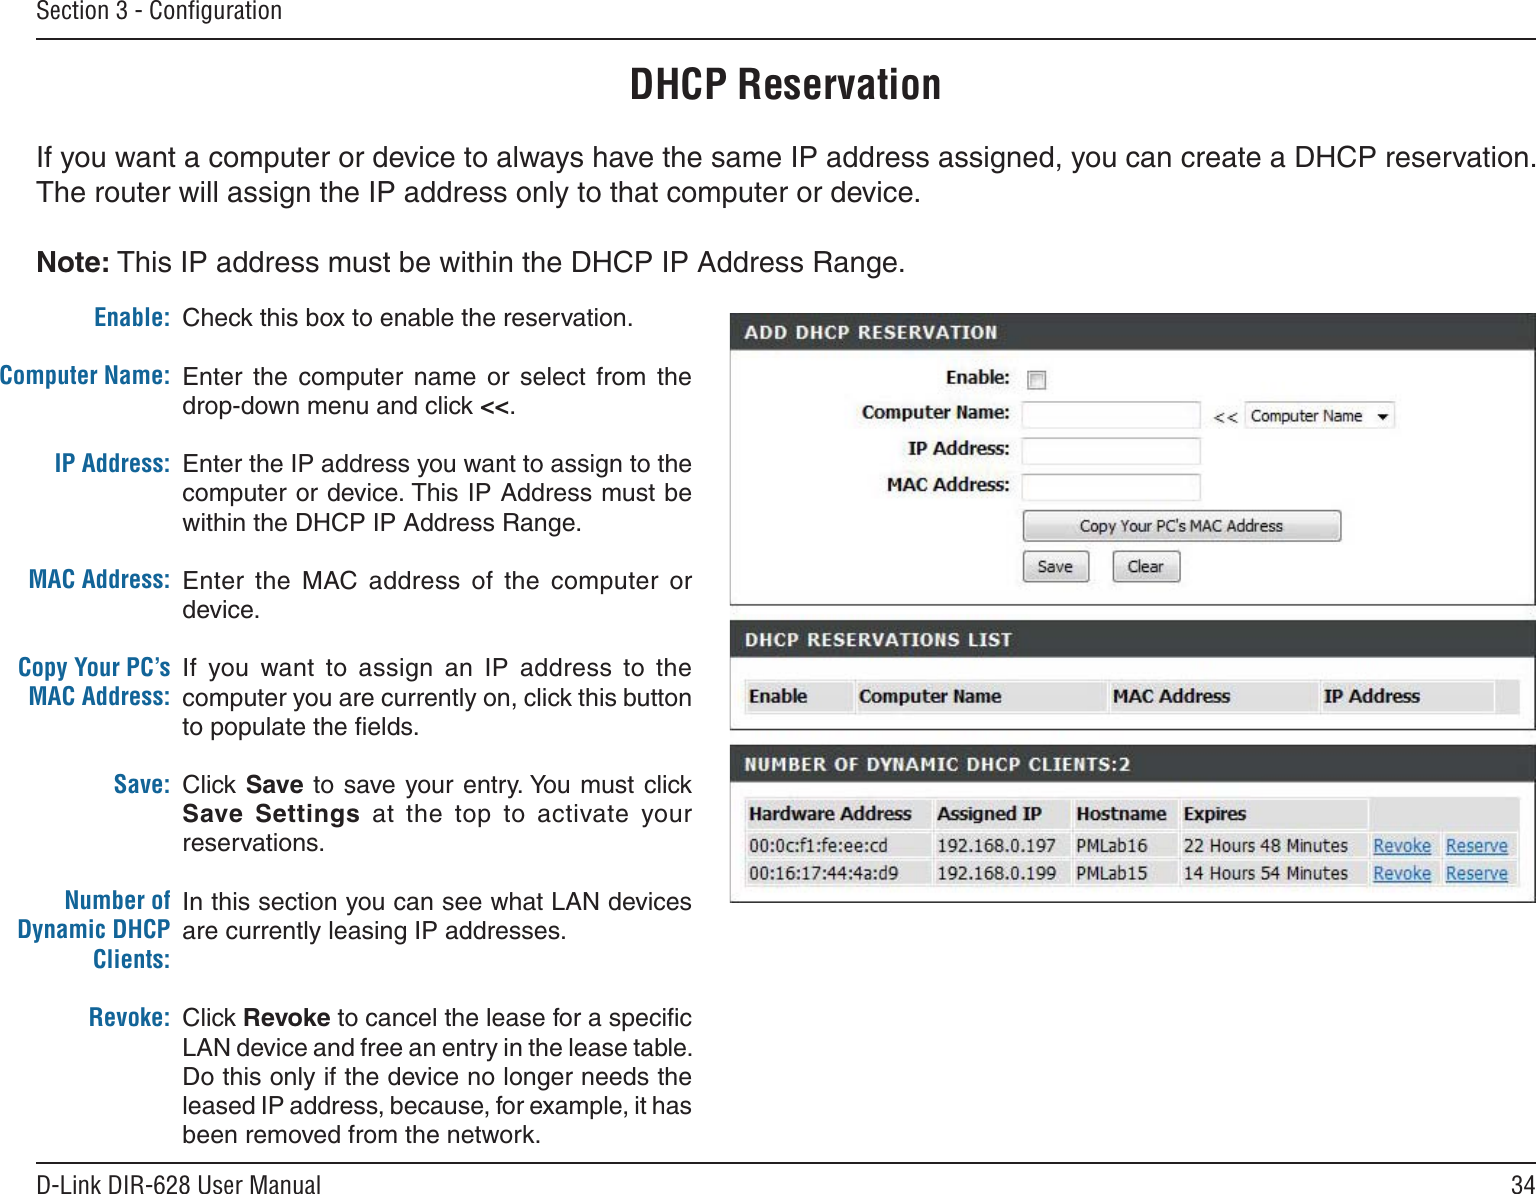 34D-Link DIR-628 User ManualSection 3 - ConﬁgurationDHCP ReservationIf you want a computer or device to always have the same IP address assigned, you can create a DHCP reservation. The router will assign the IP address only to that computer or device. Note: This IP address must be within the DHCP IP Address Range.Check this box to enable the reservation.Enter  the  computer  name  or  select  from  the drop-down menu and click &lt;&lt;.Enter the IP address you want to assign to the computer or device. This IP Address must be within the DHCP IP Address Range.Enter  the  MAC address  of  the  computer  or device.If  you  want  to  assign  an  IP  address  to  the computer you are currently on, click this button to populate the ﬁelds. Click Save to  save your entry. You must click Save  Settings  at  the  top  to  activate  your reservations. In this section you can see what LAN devices are currently leasing IP addresses.Click Revoke to cancel the lease for a speciﬁc LAN device and free an entry in the lease table. Do this only if the device no longer needs the leased IP address, because, for example, it has been removed from the network.Enable:Computer Name:IP Address:MAC Address:Copy Your PC’s MAC Address:Save:Number of Dynamic DHCP Clients:Revoke: